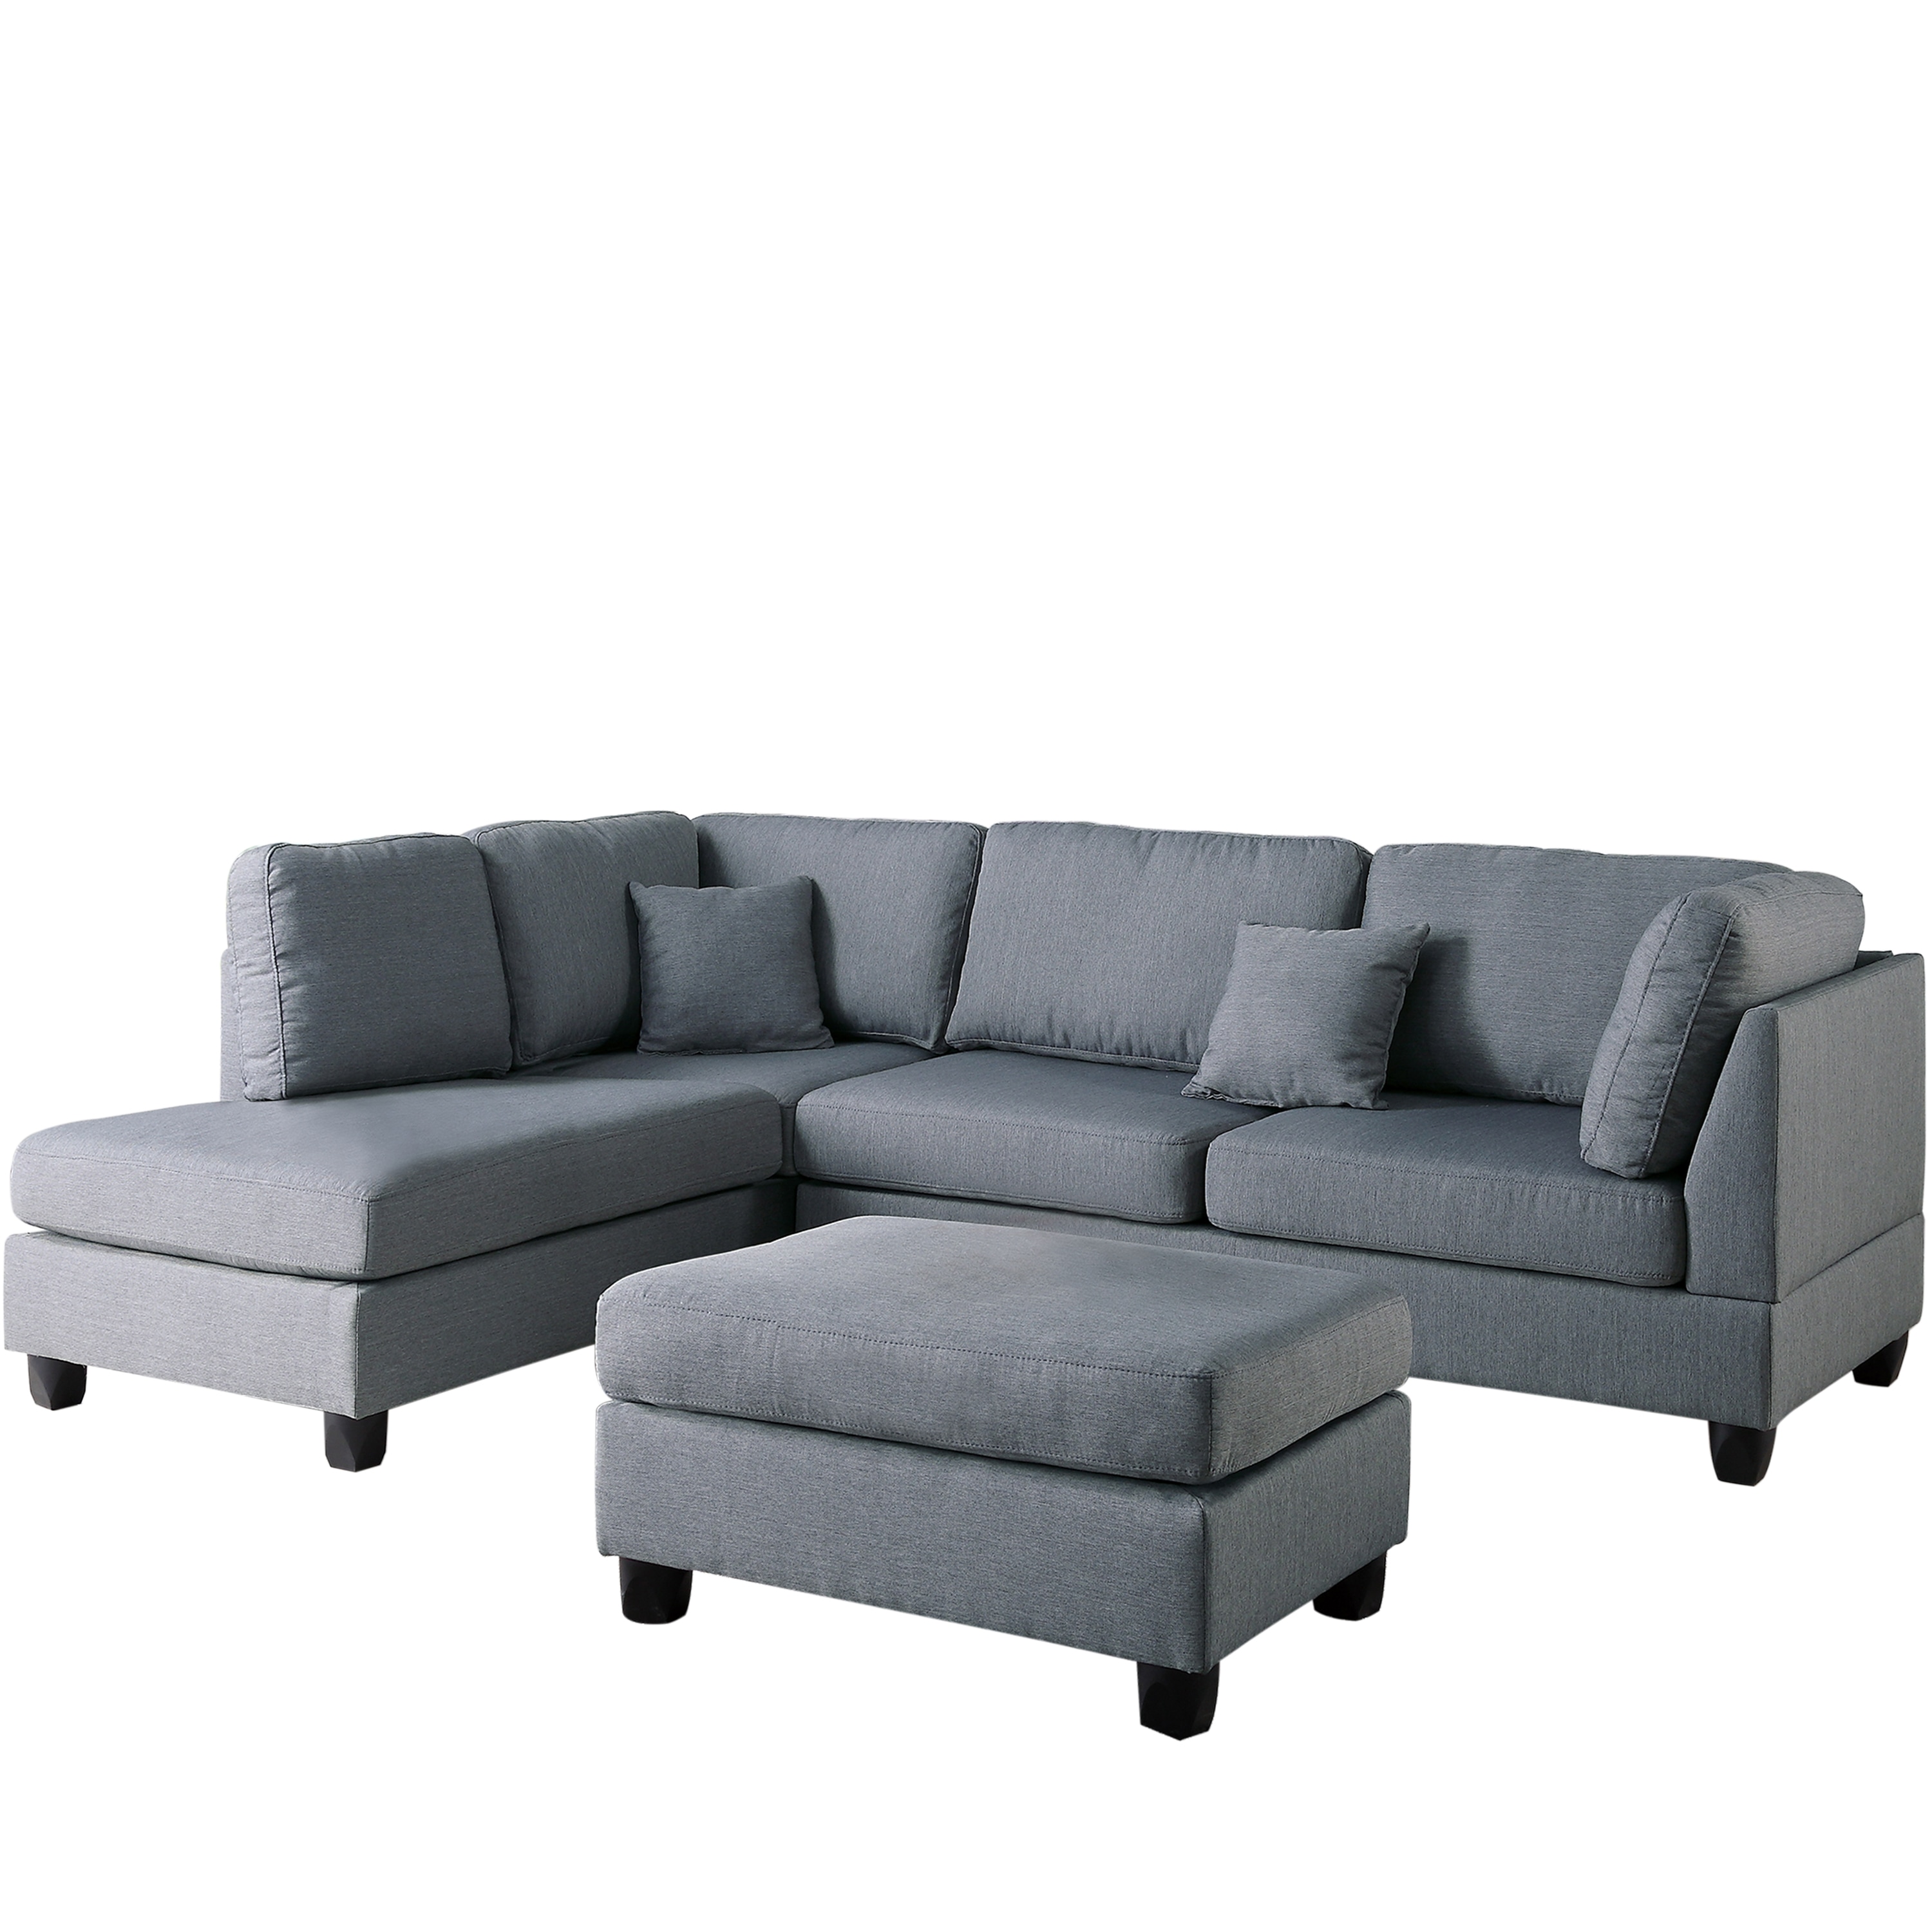 1 Top Rated Couches, Sofas & Loveseats at